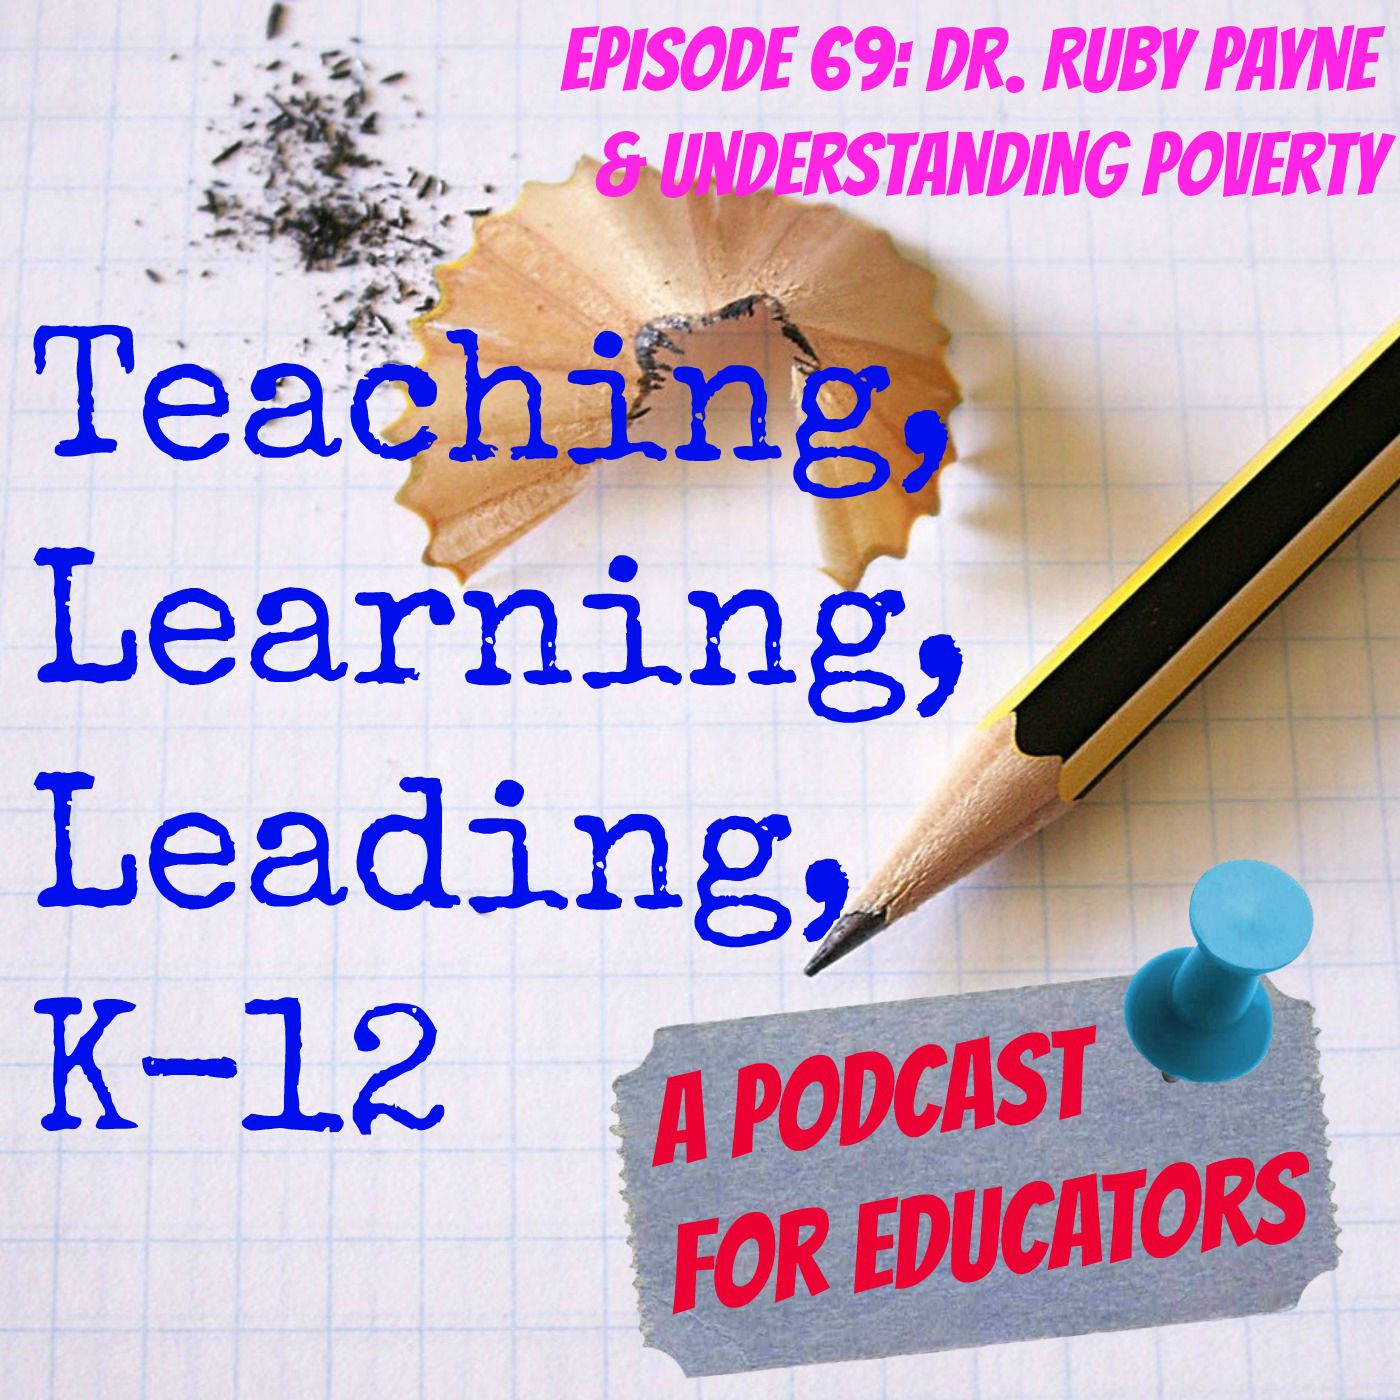 Episode 69: Dr. Ruby Payne & Understanding Poverty